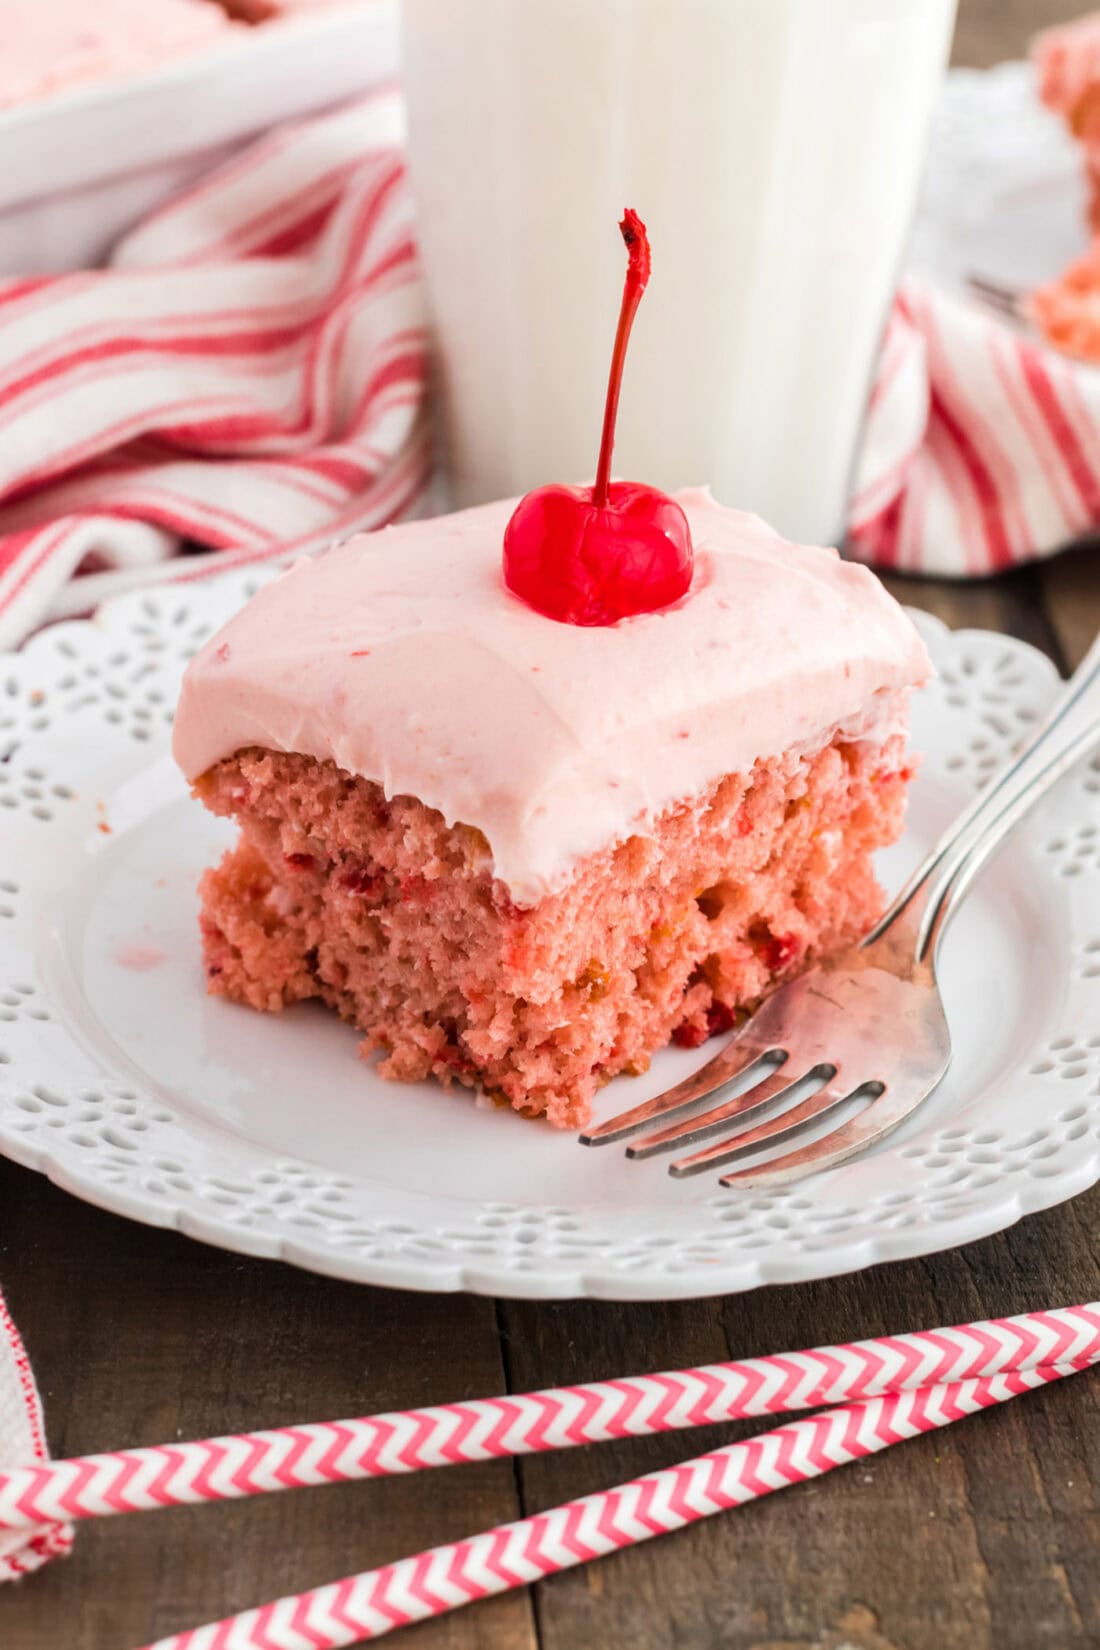 slice of cherry cake on a plate with straws in foreground